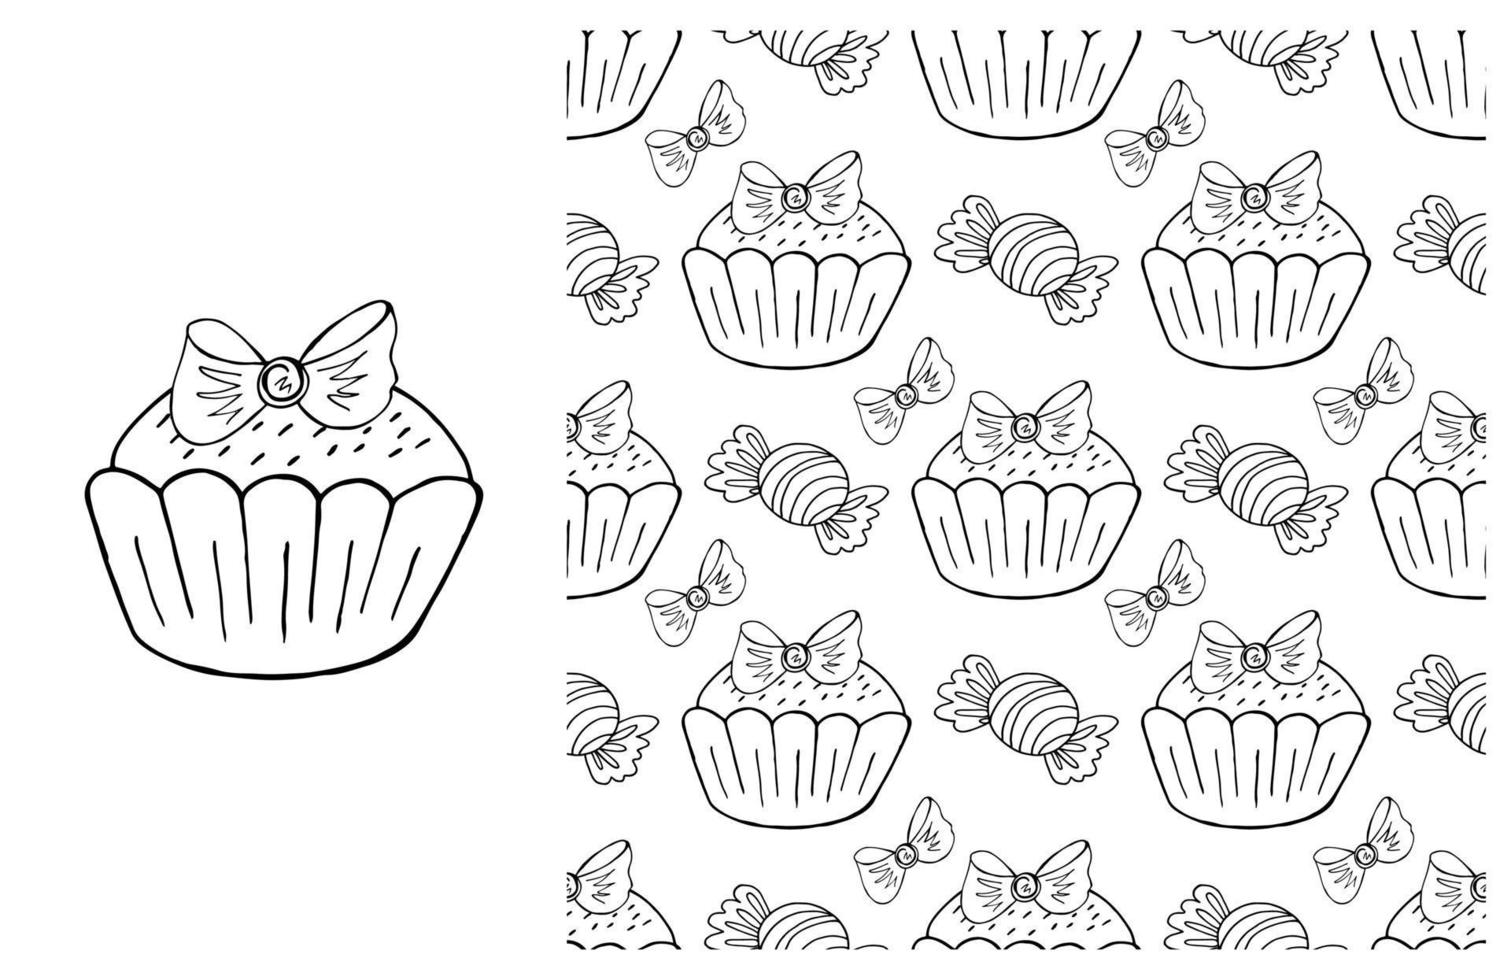 Coloring Cupcake. Set of element and seamless pattern vector